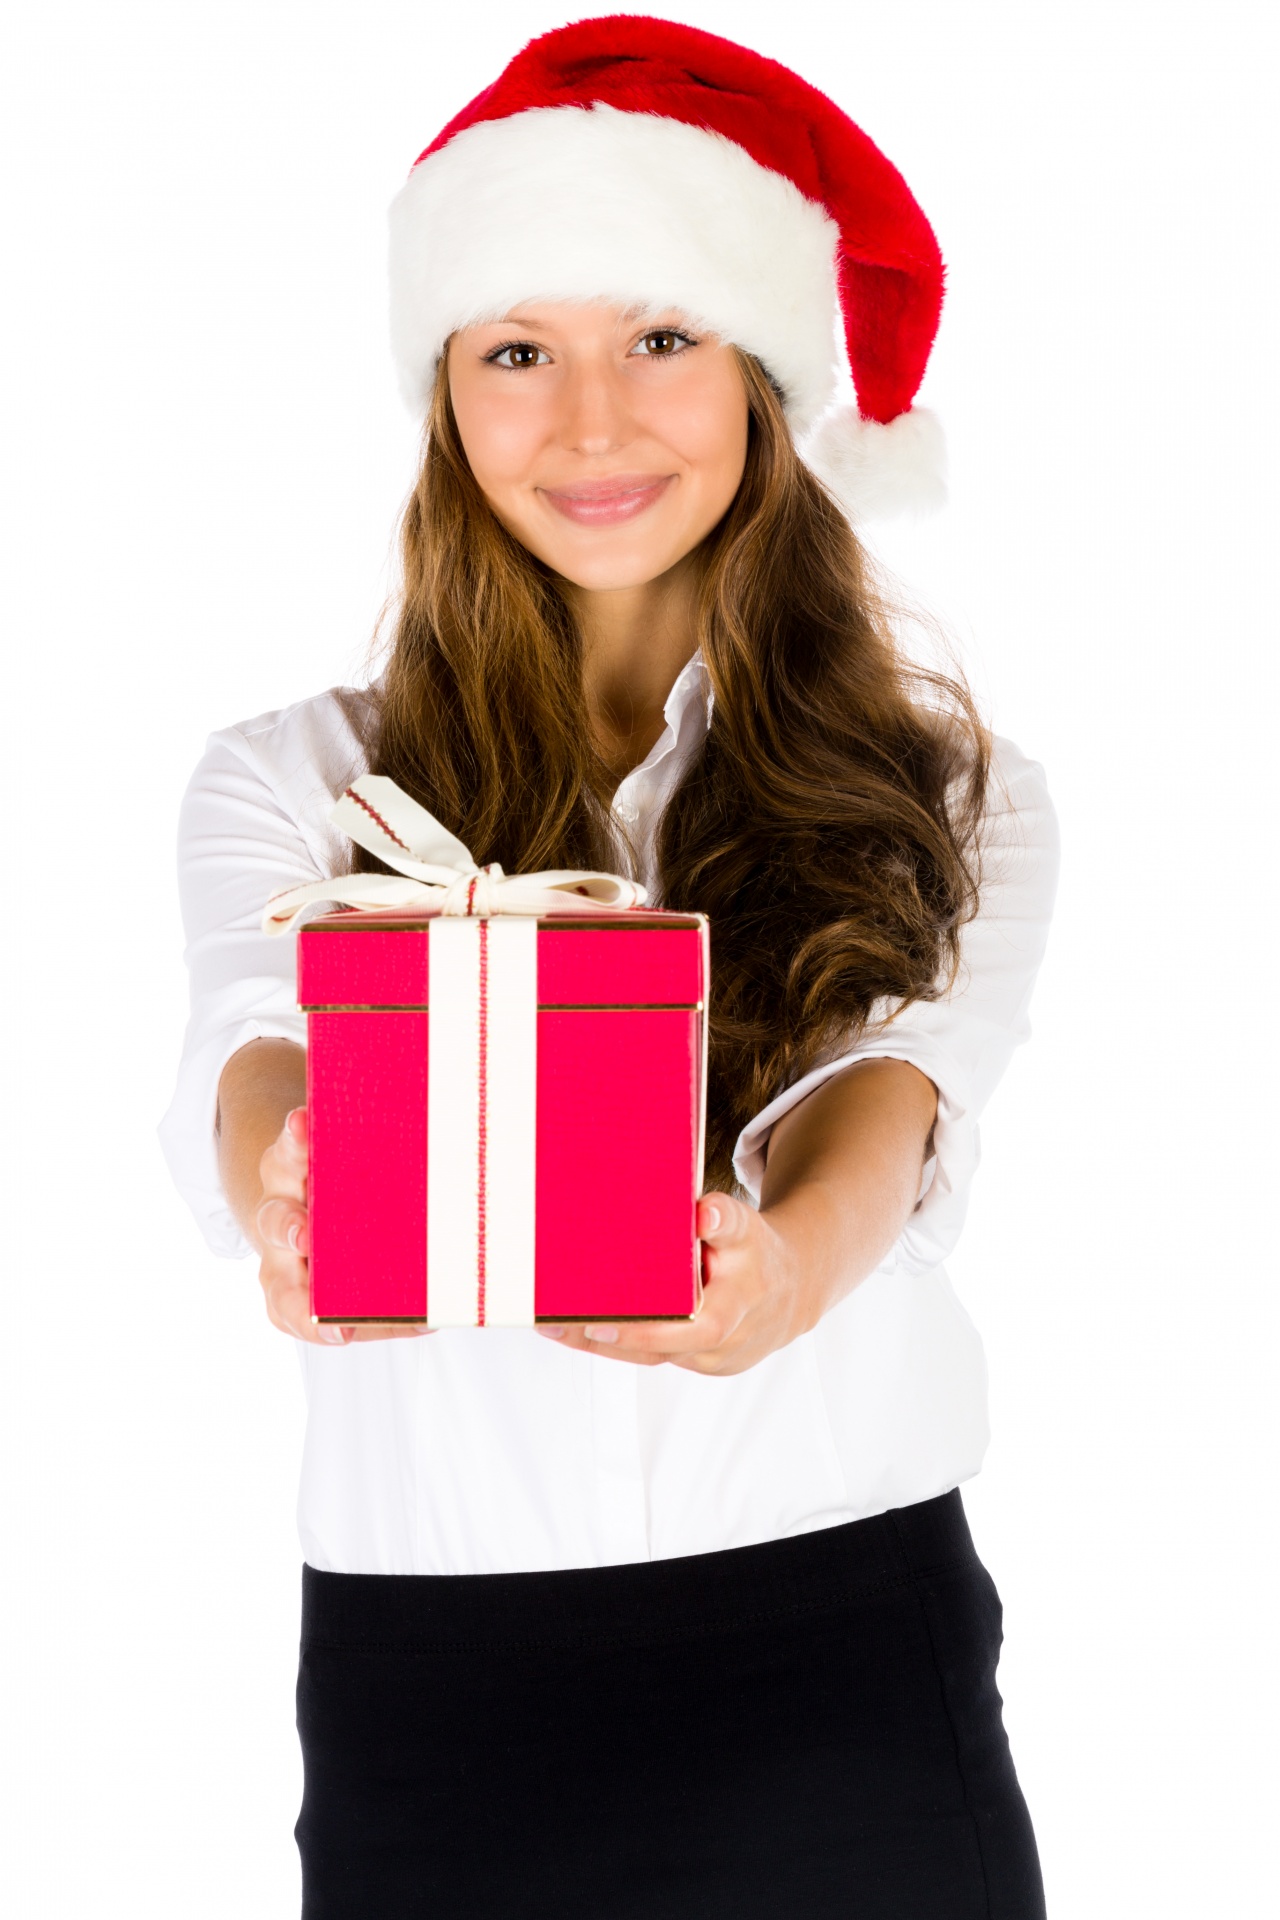 Giving A Christmas Gift Free Stock Photo - Public Domain Pictures